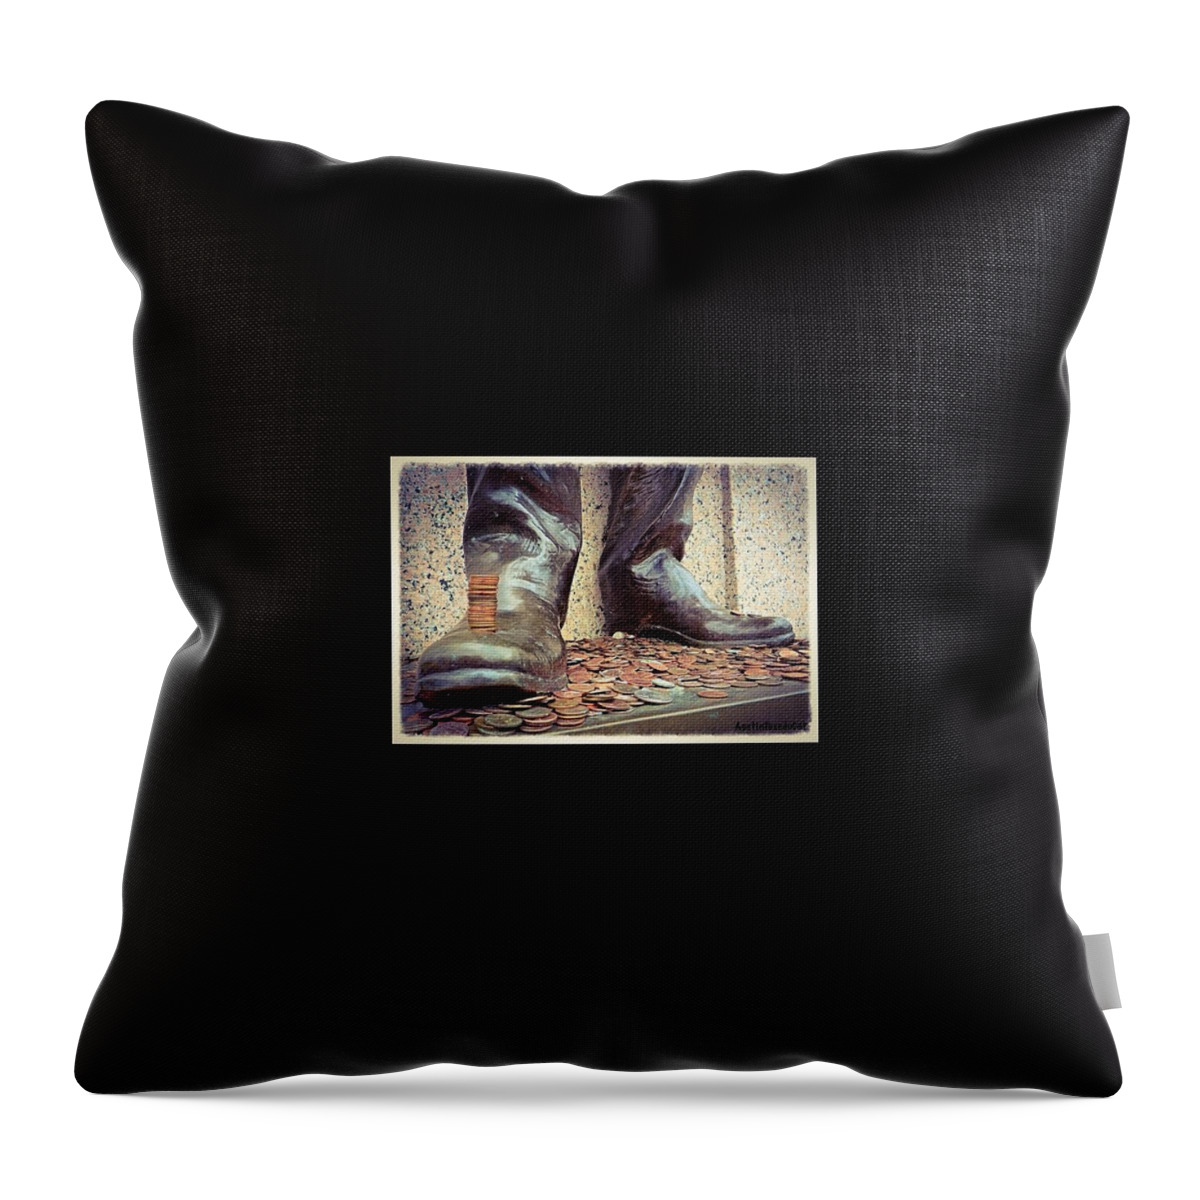 Collegelife Throw Pillow featuring the photograph #pennies And A Good #luck #tradition At #1 by Austin Tuxedo Cat